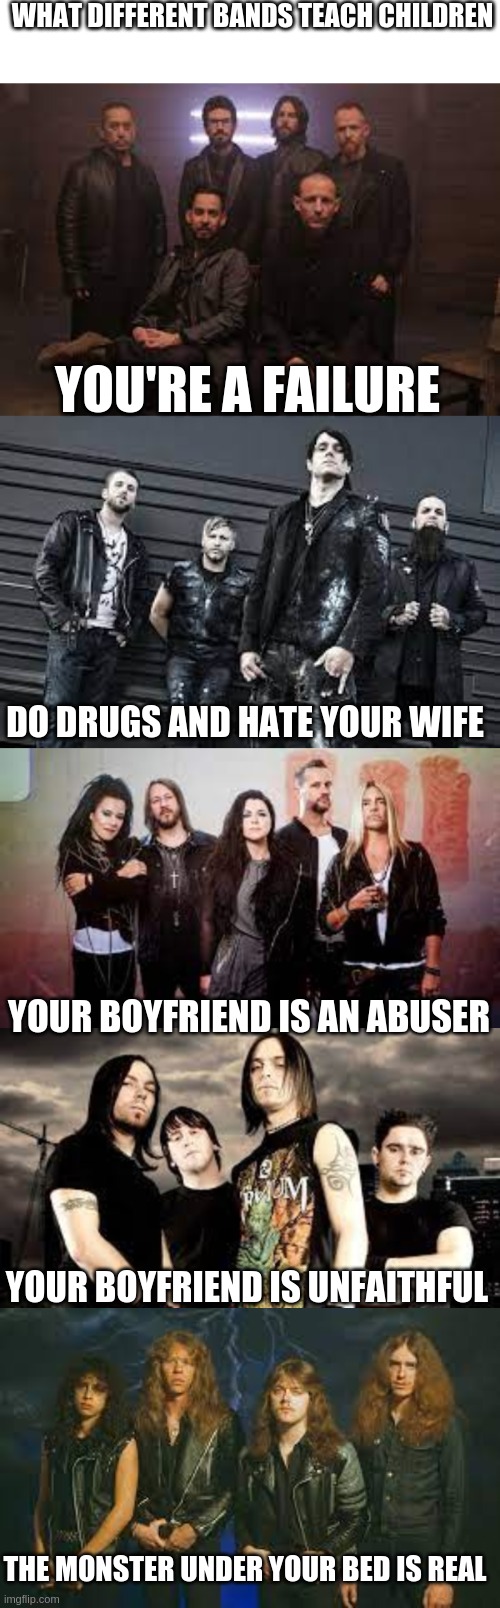 WHAT DIFFERENT BANDS TEACH CHILDREN; YOU'RE A FAILURE; DO DRUGS AND HATE YOUR WIFE; YOUR BOYFRIEND IS AN ABUSER; YOUR BOYFRIEND IS UNFAITHFUL; THE MONSTER UNDER YOUR BED IS REAL | made w/ Imgflip meme maker